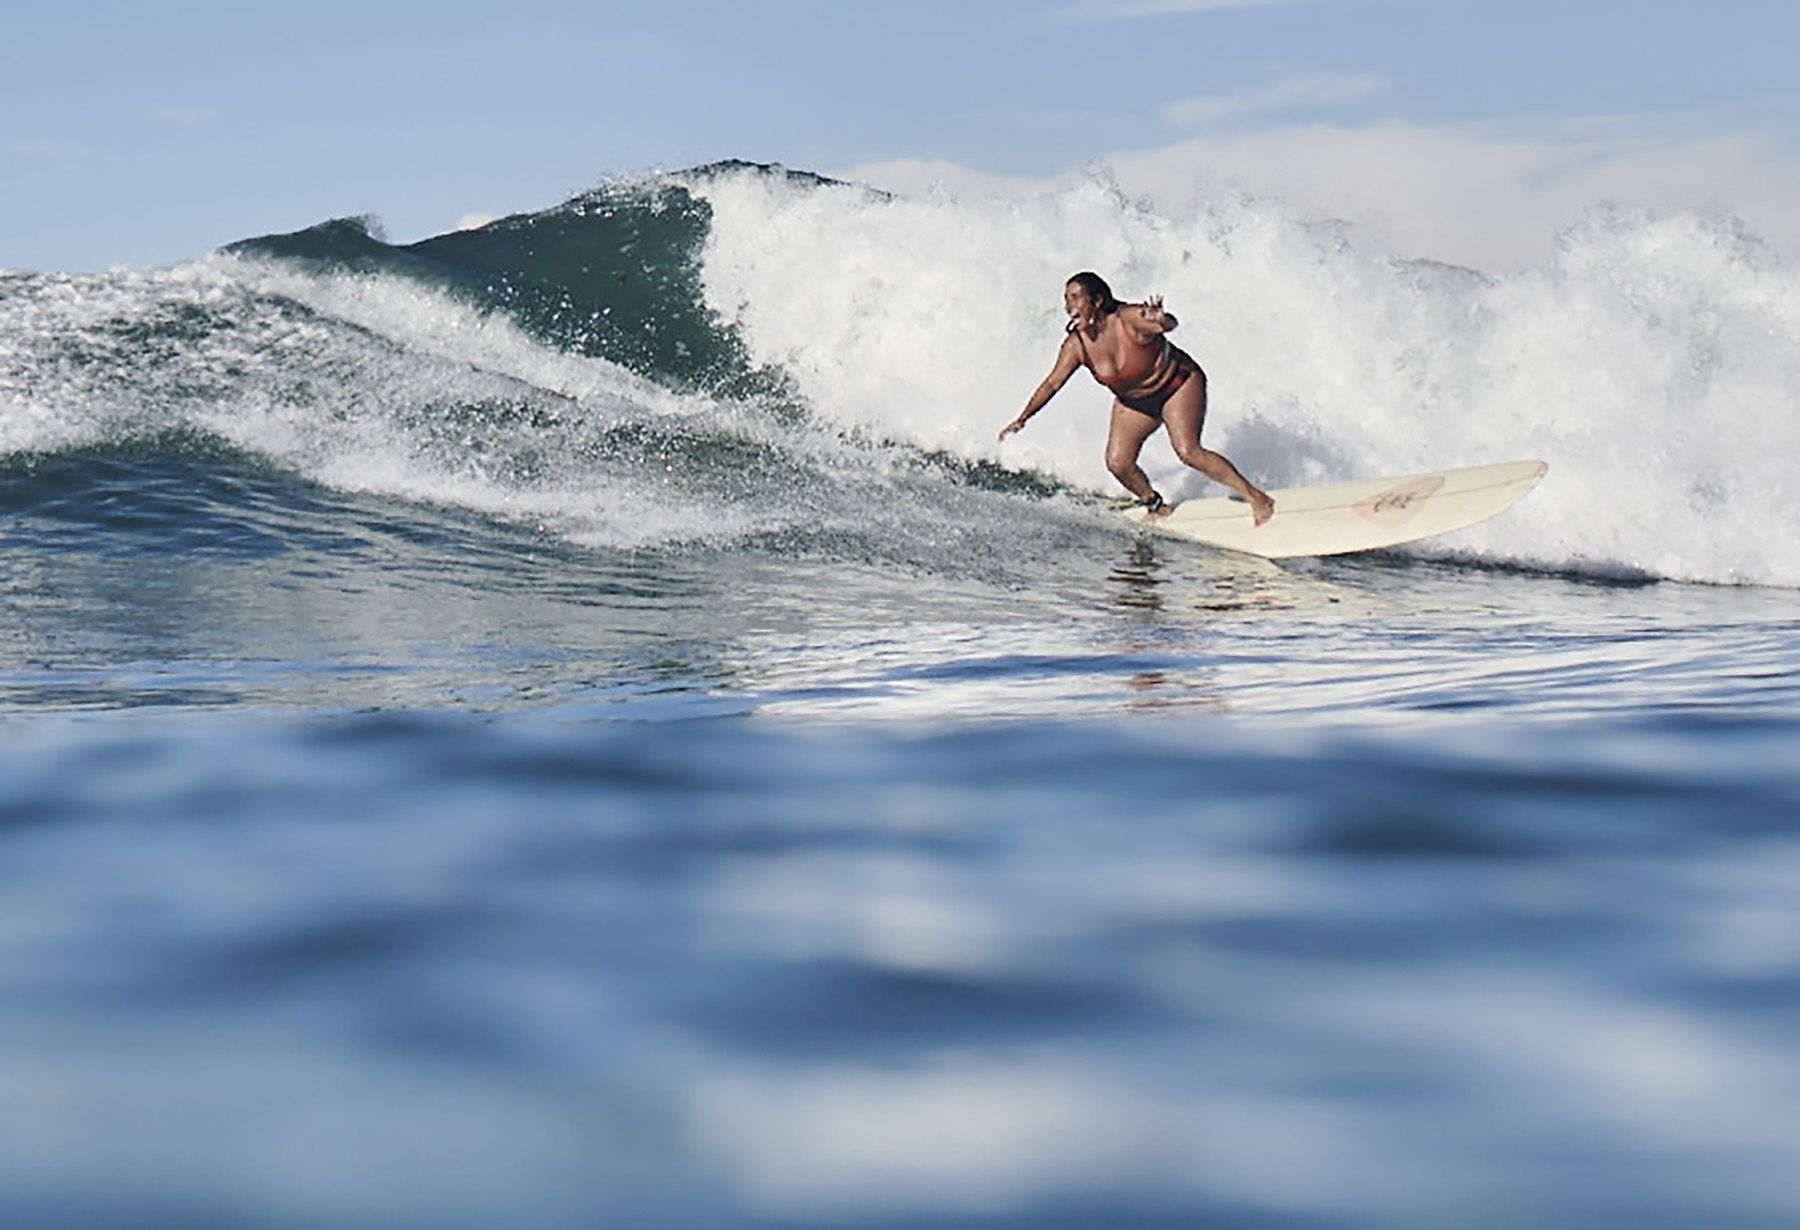 Meet Curvy Surfer Girl, The Movement Making Waves For Plus-Size Athletes